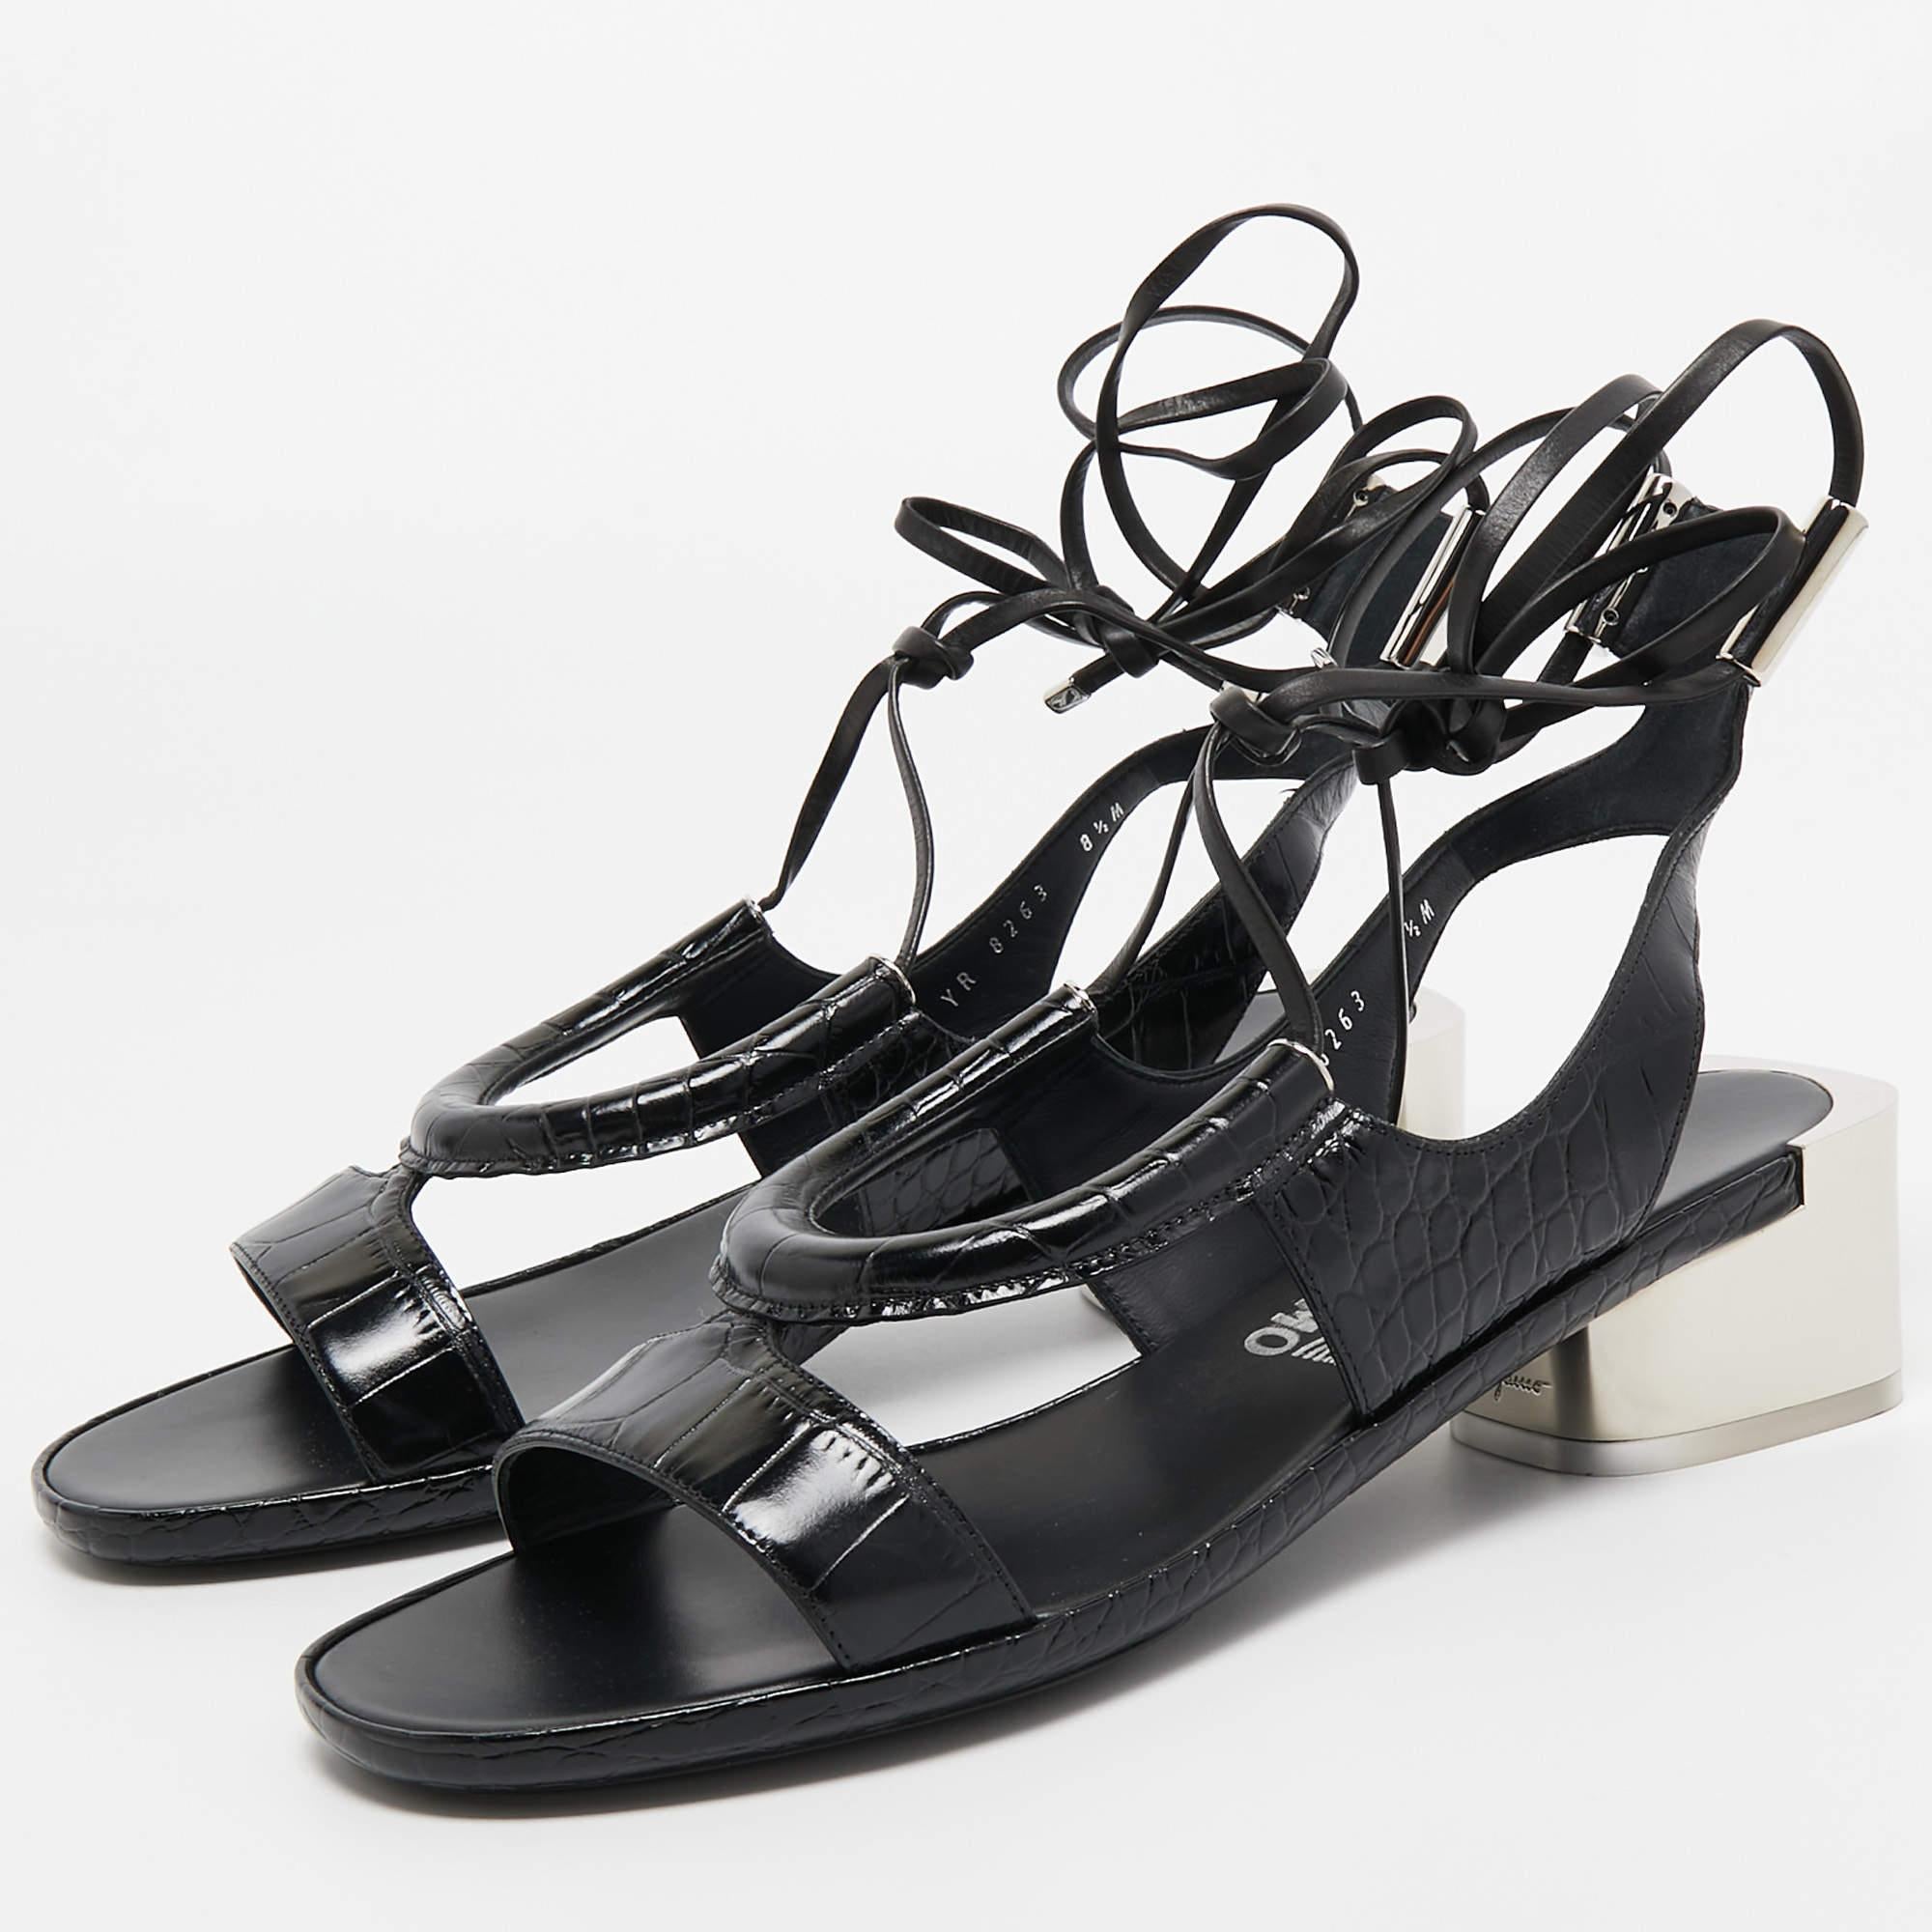 The fashion house’s tradition of excellence, coupled with modern design sensibilities, works to make these Salvatore Ferragamo sandals a fabulous choice. They'll help you deliver a chic look with ease.

Includes: Original Dustbag, Original Box